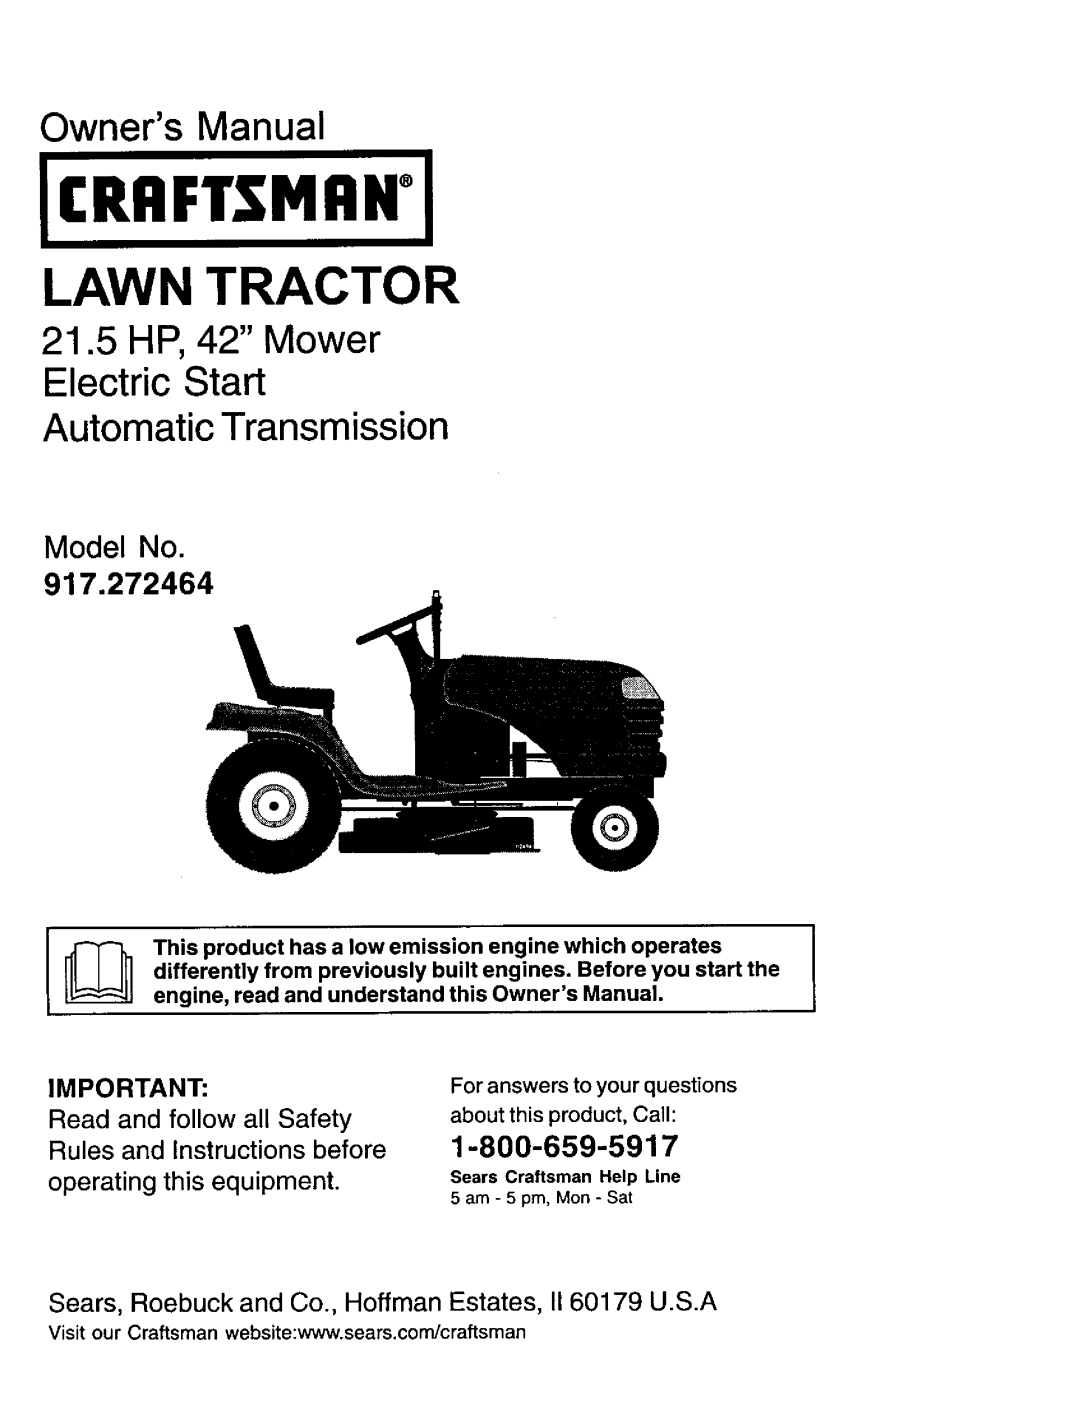 Craftsman 917.272464 owner manual 21.5HP, 42 Mower, operating this equipment, Icraftsmani, Lawn Tractor, Owners Manual 